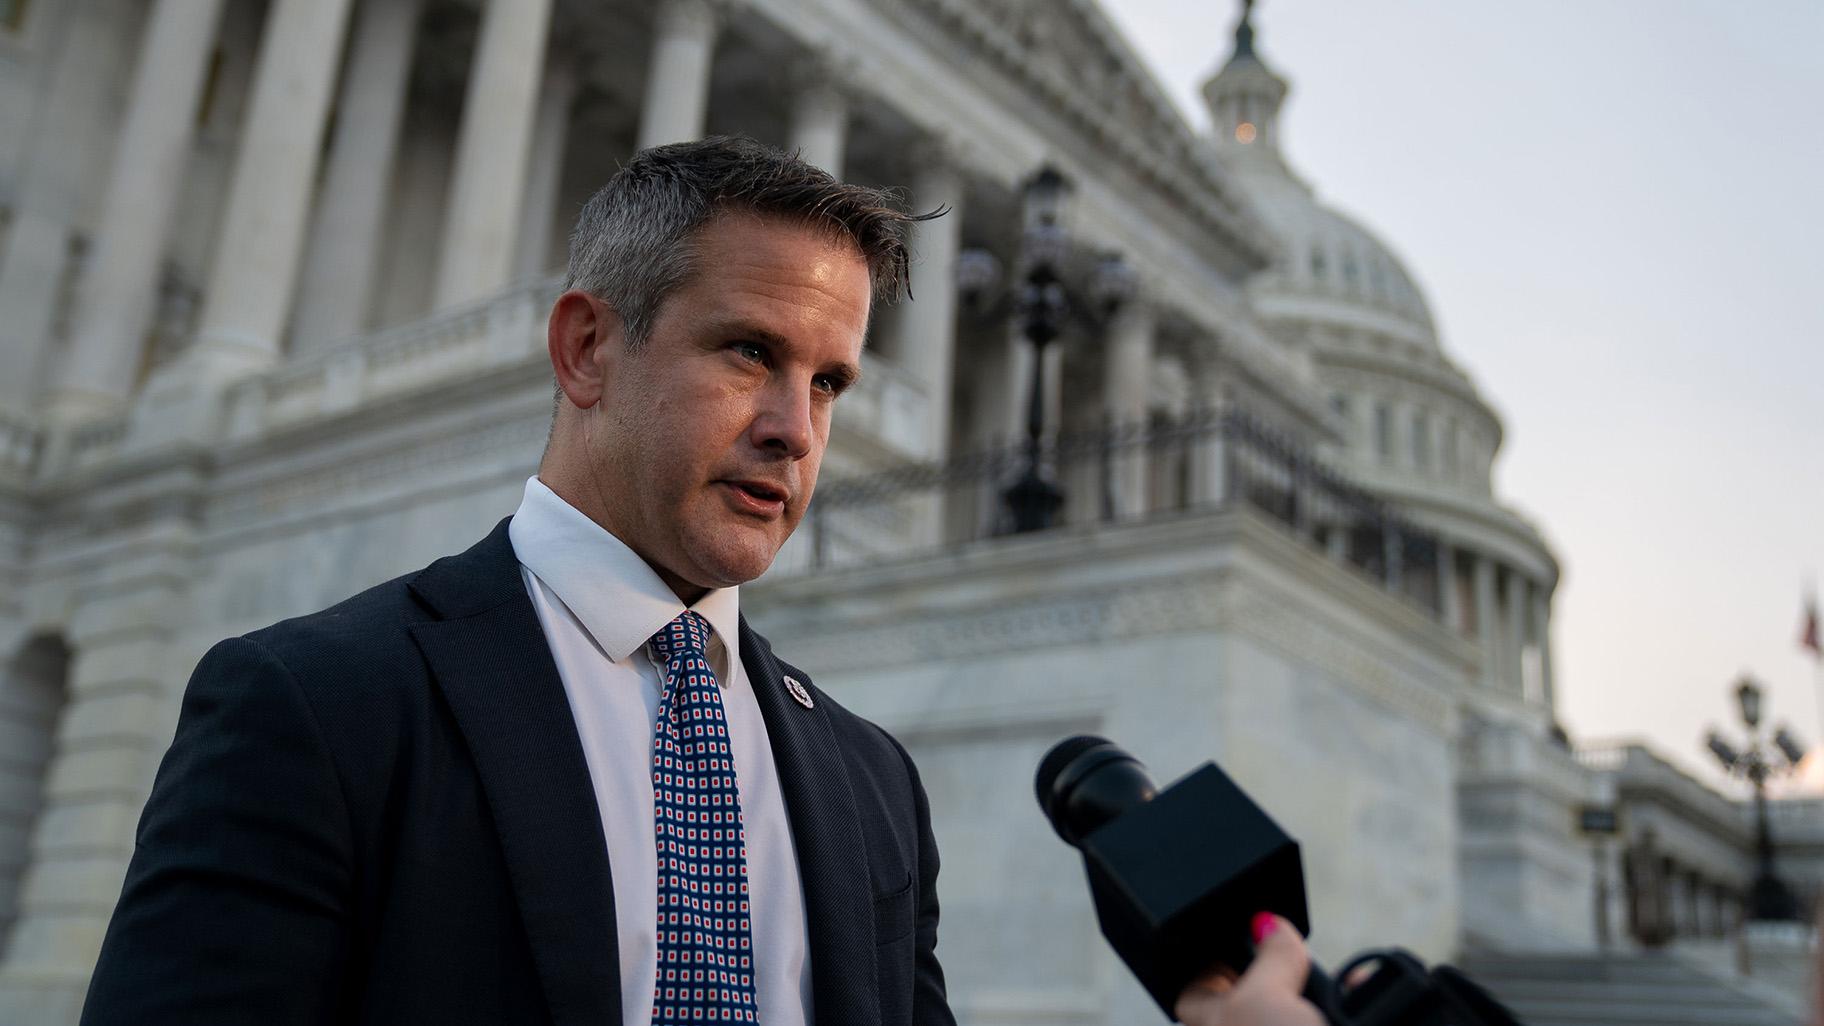 Rep. Adam Kinzinger, seen here in August 2021 in Washington, D.C., is actively weighing his political fortunes despite serious questions about whether there’s any future for a Donald Trump critic like him in today’s GOP. (Stefani Reynolds / Bloomberg via Getty Images)